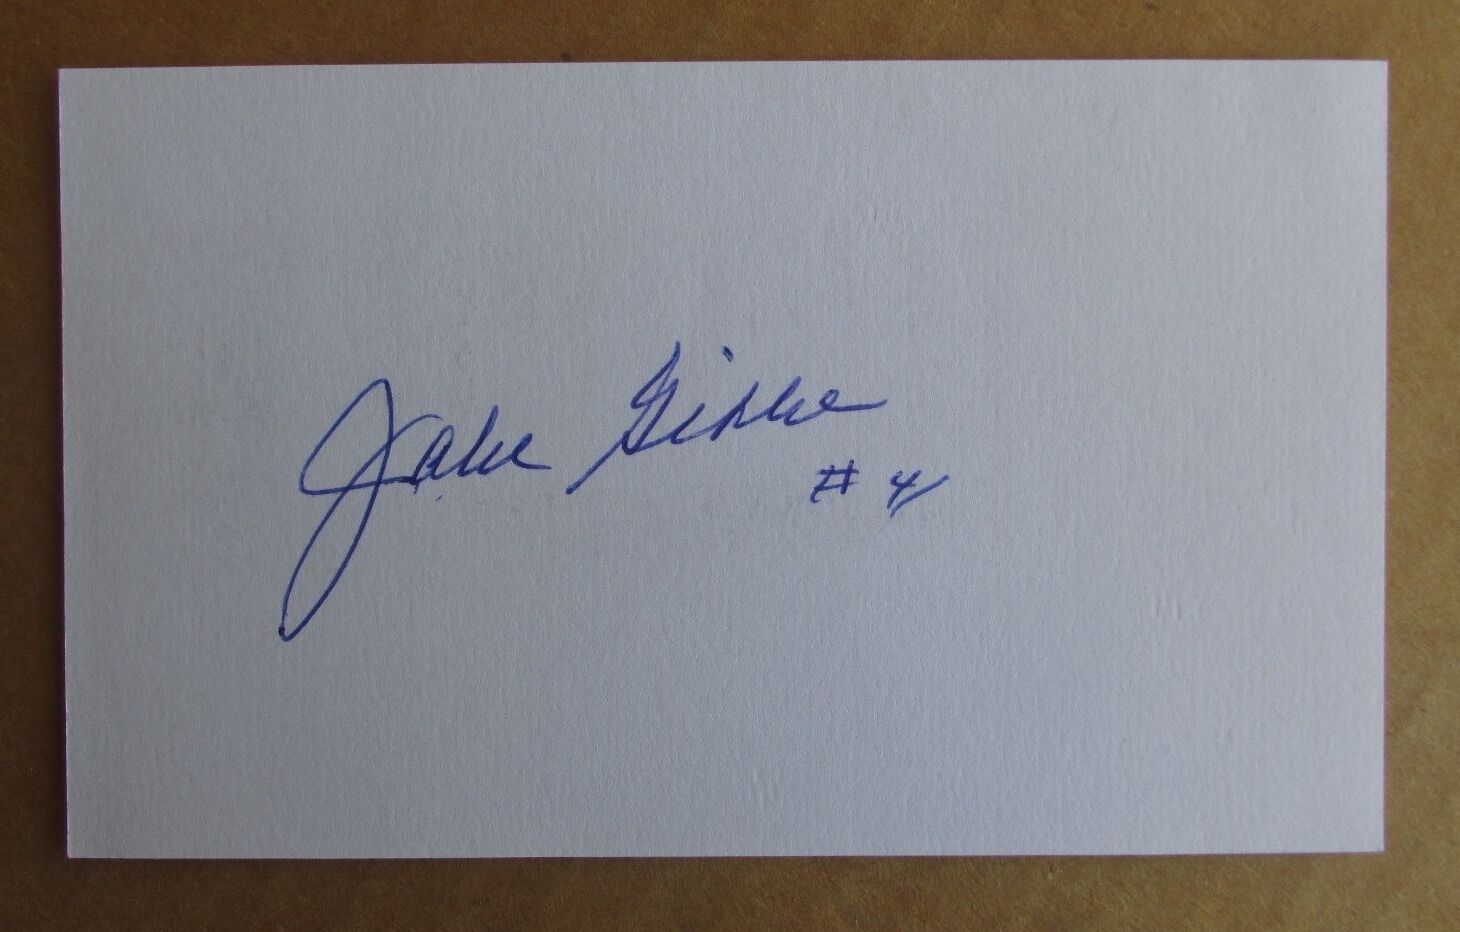 JAKE GIBBS SIGNED AUTOGRAPH 3X5 INDEX CARD CATCHER 1962-1971 NEW YORK YANKEES